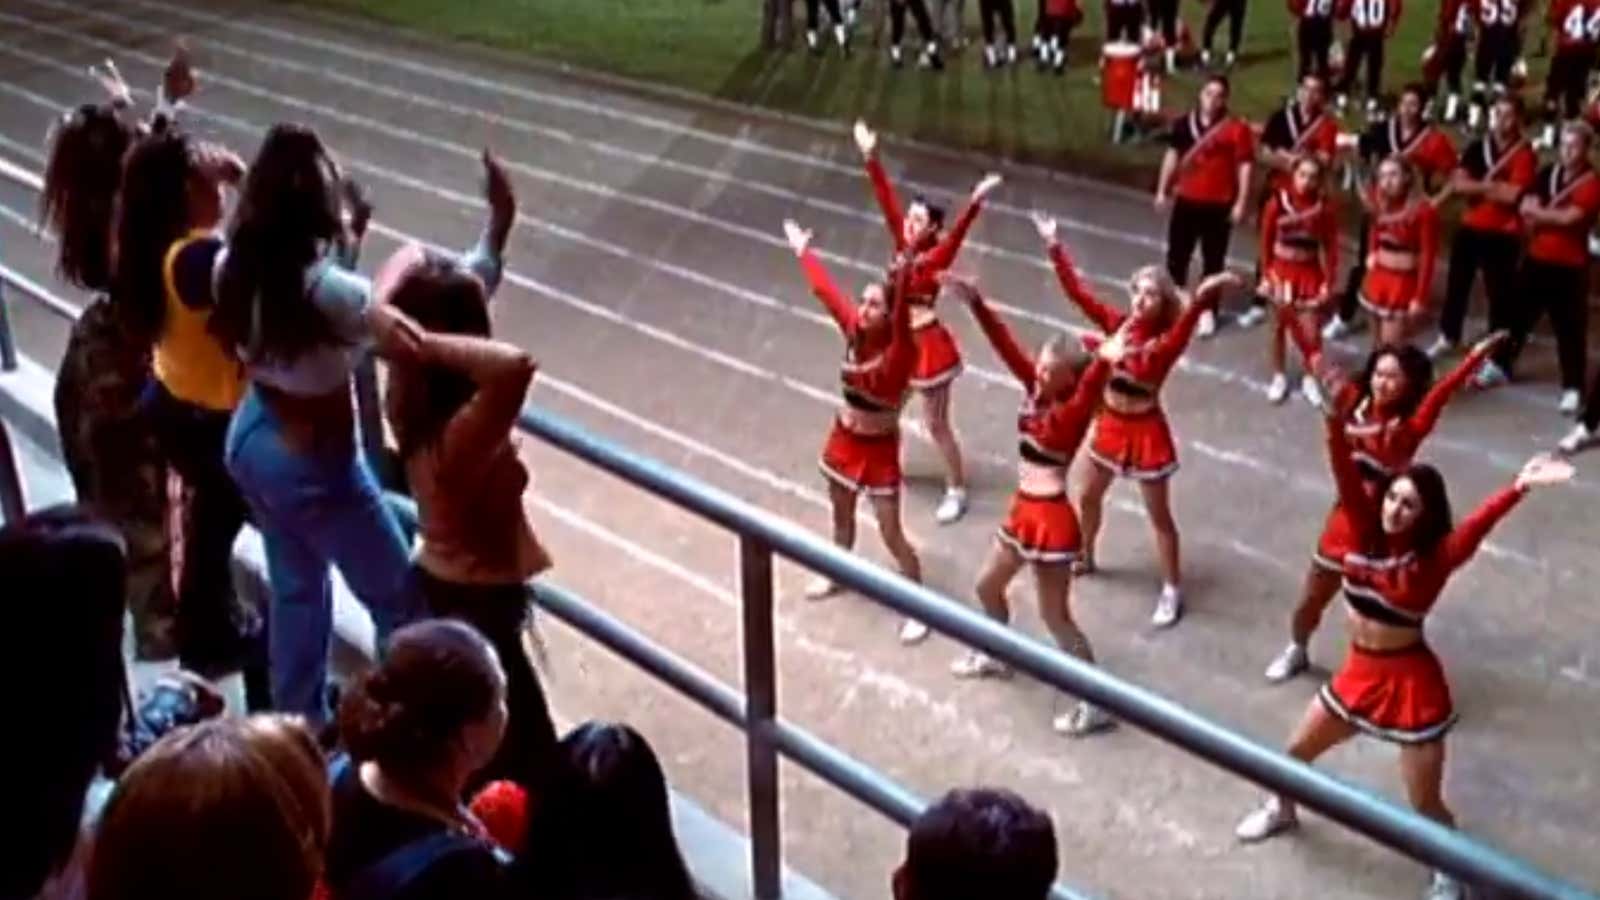 The sudden resurgence of “Bring It On” memes this week, explained